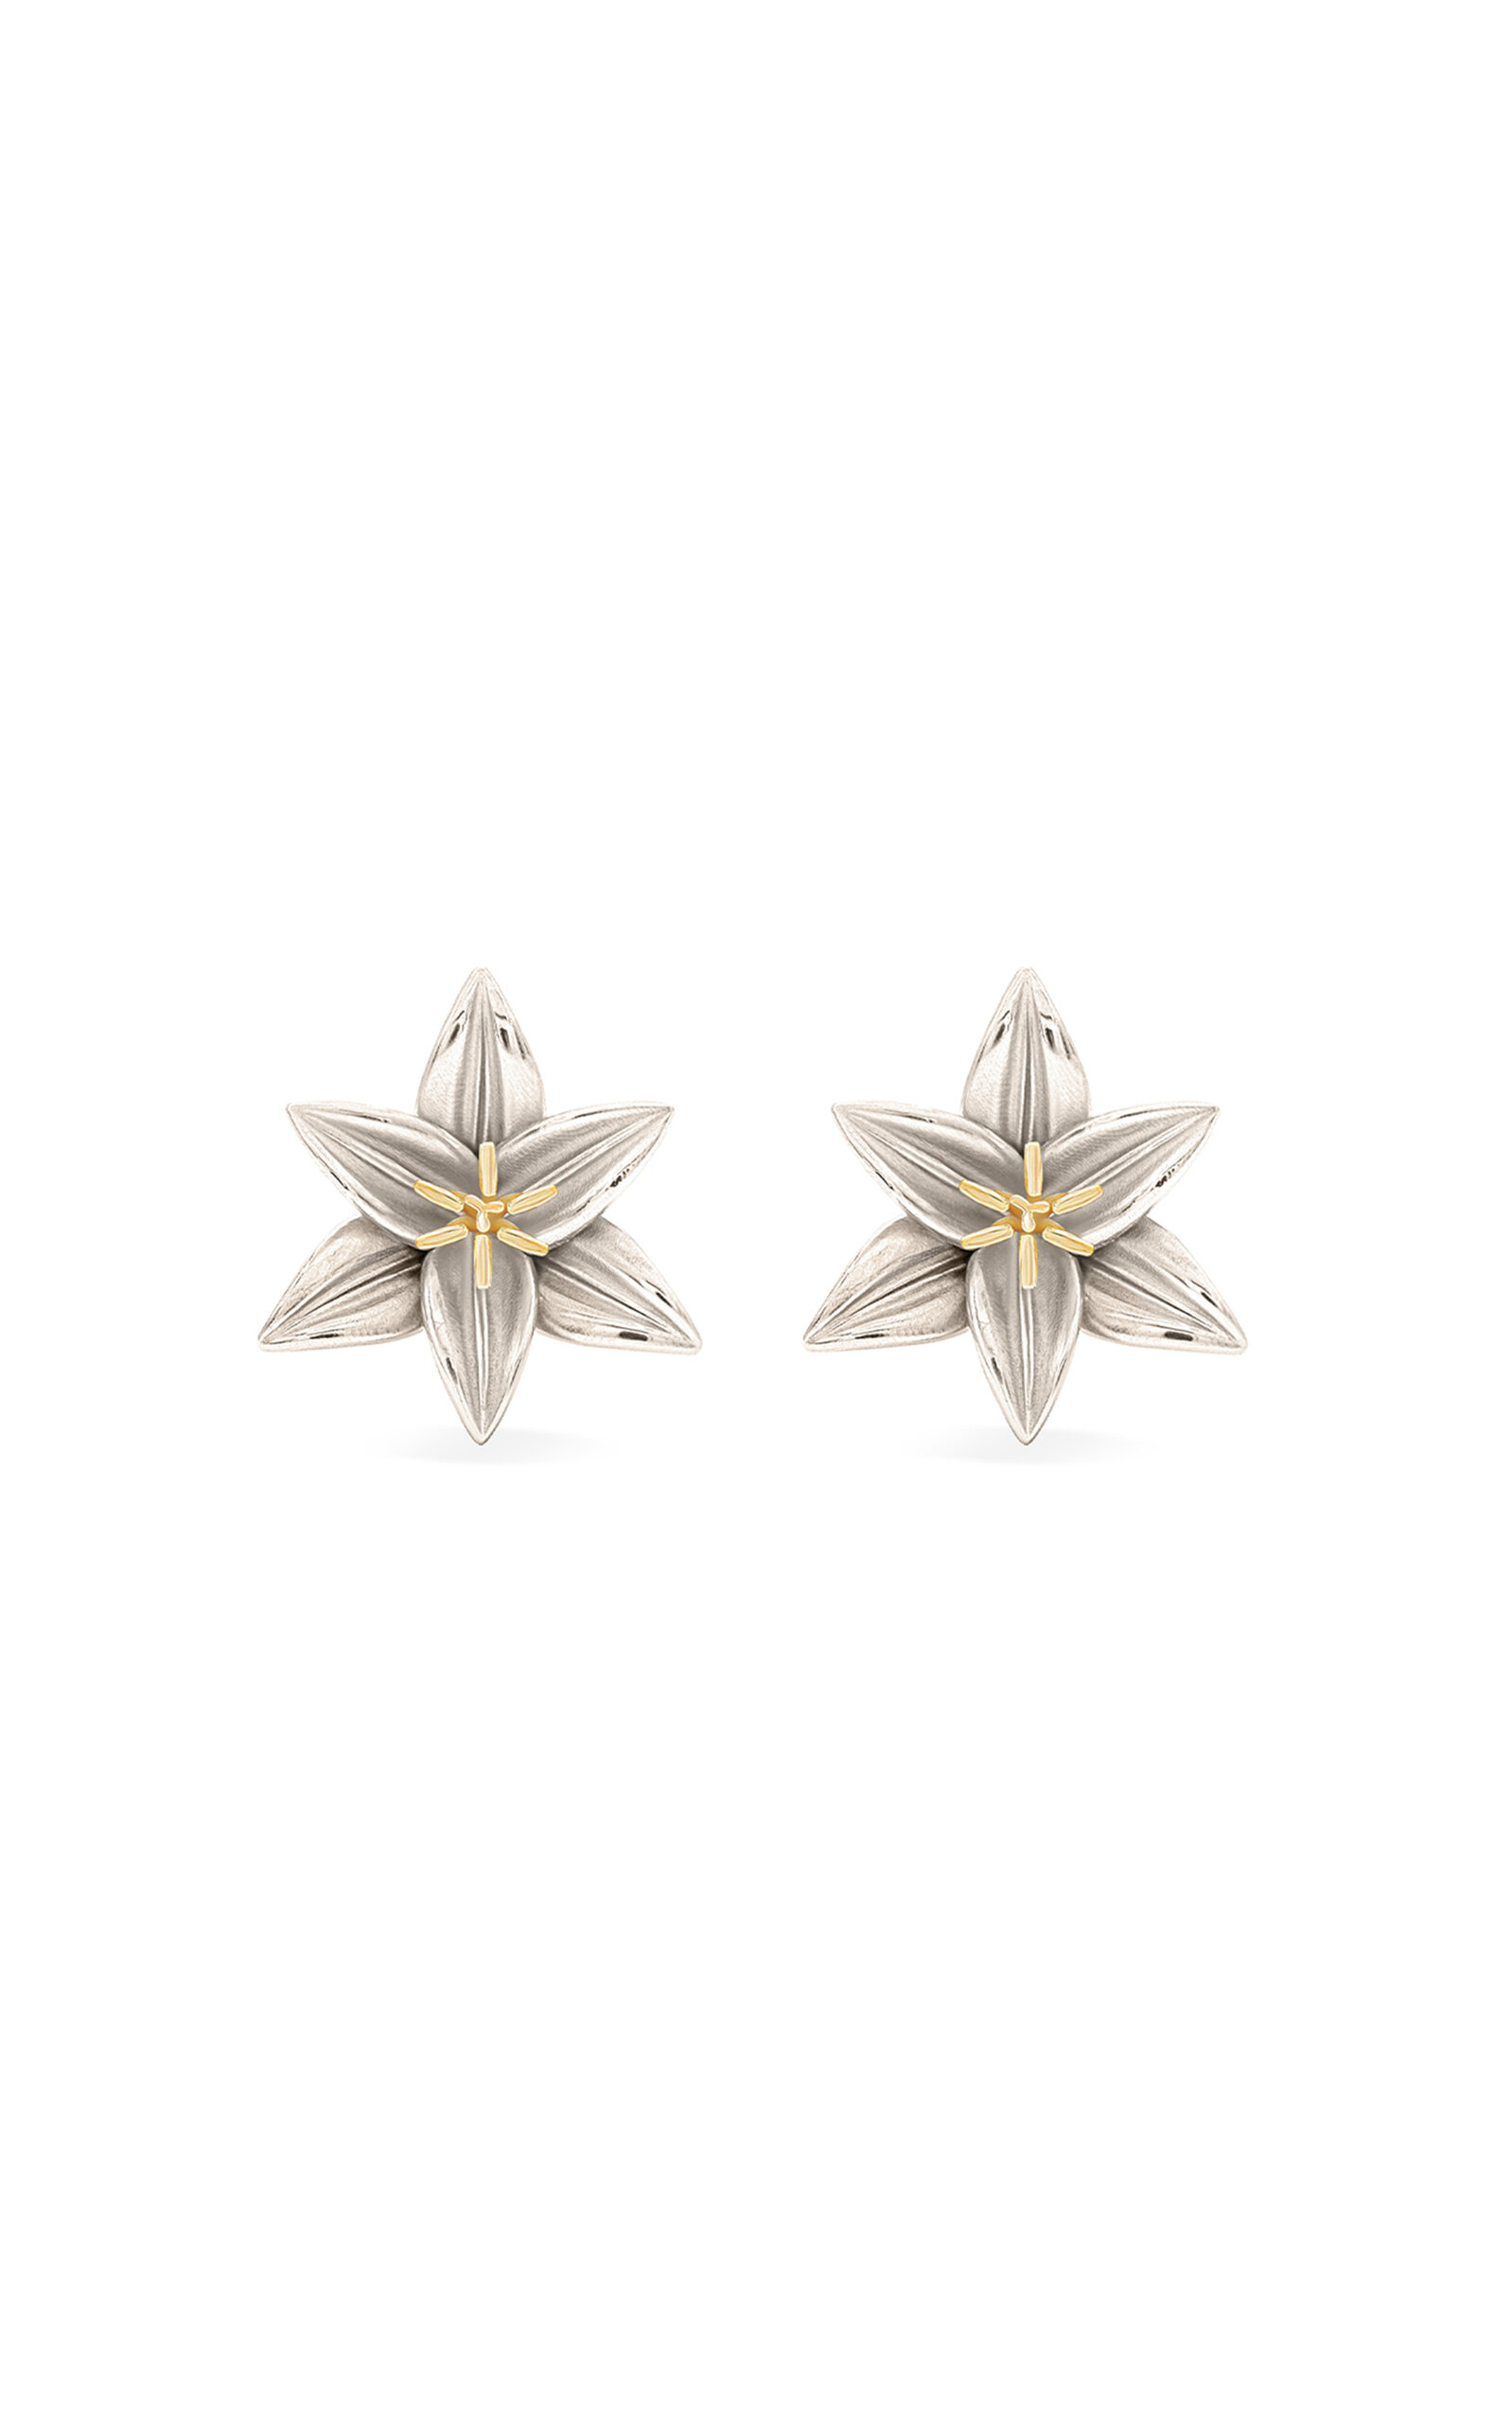 Lily 14K Yellow and White Gold Earrings